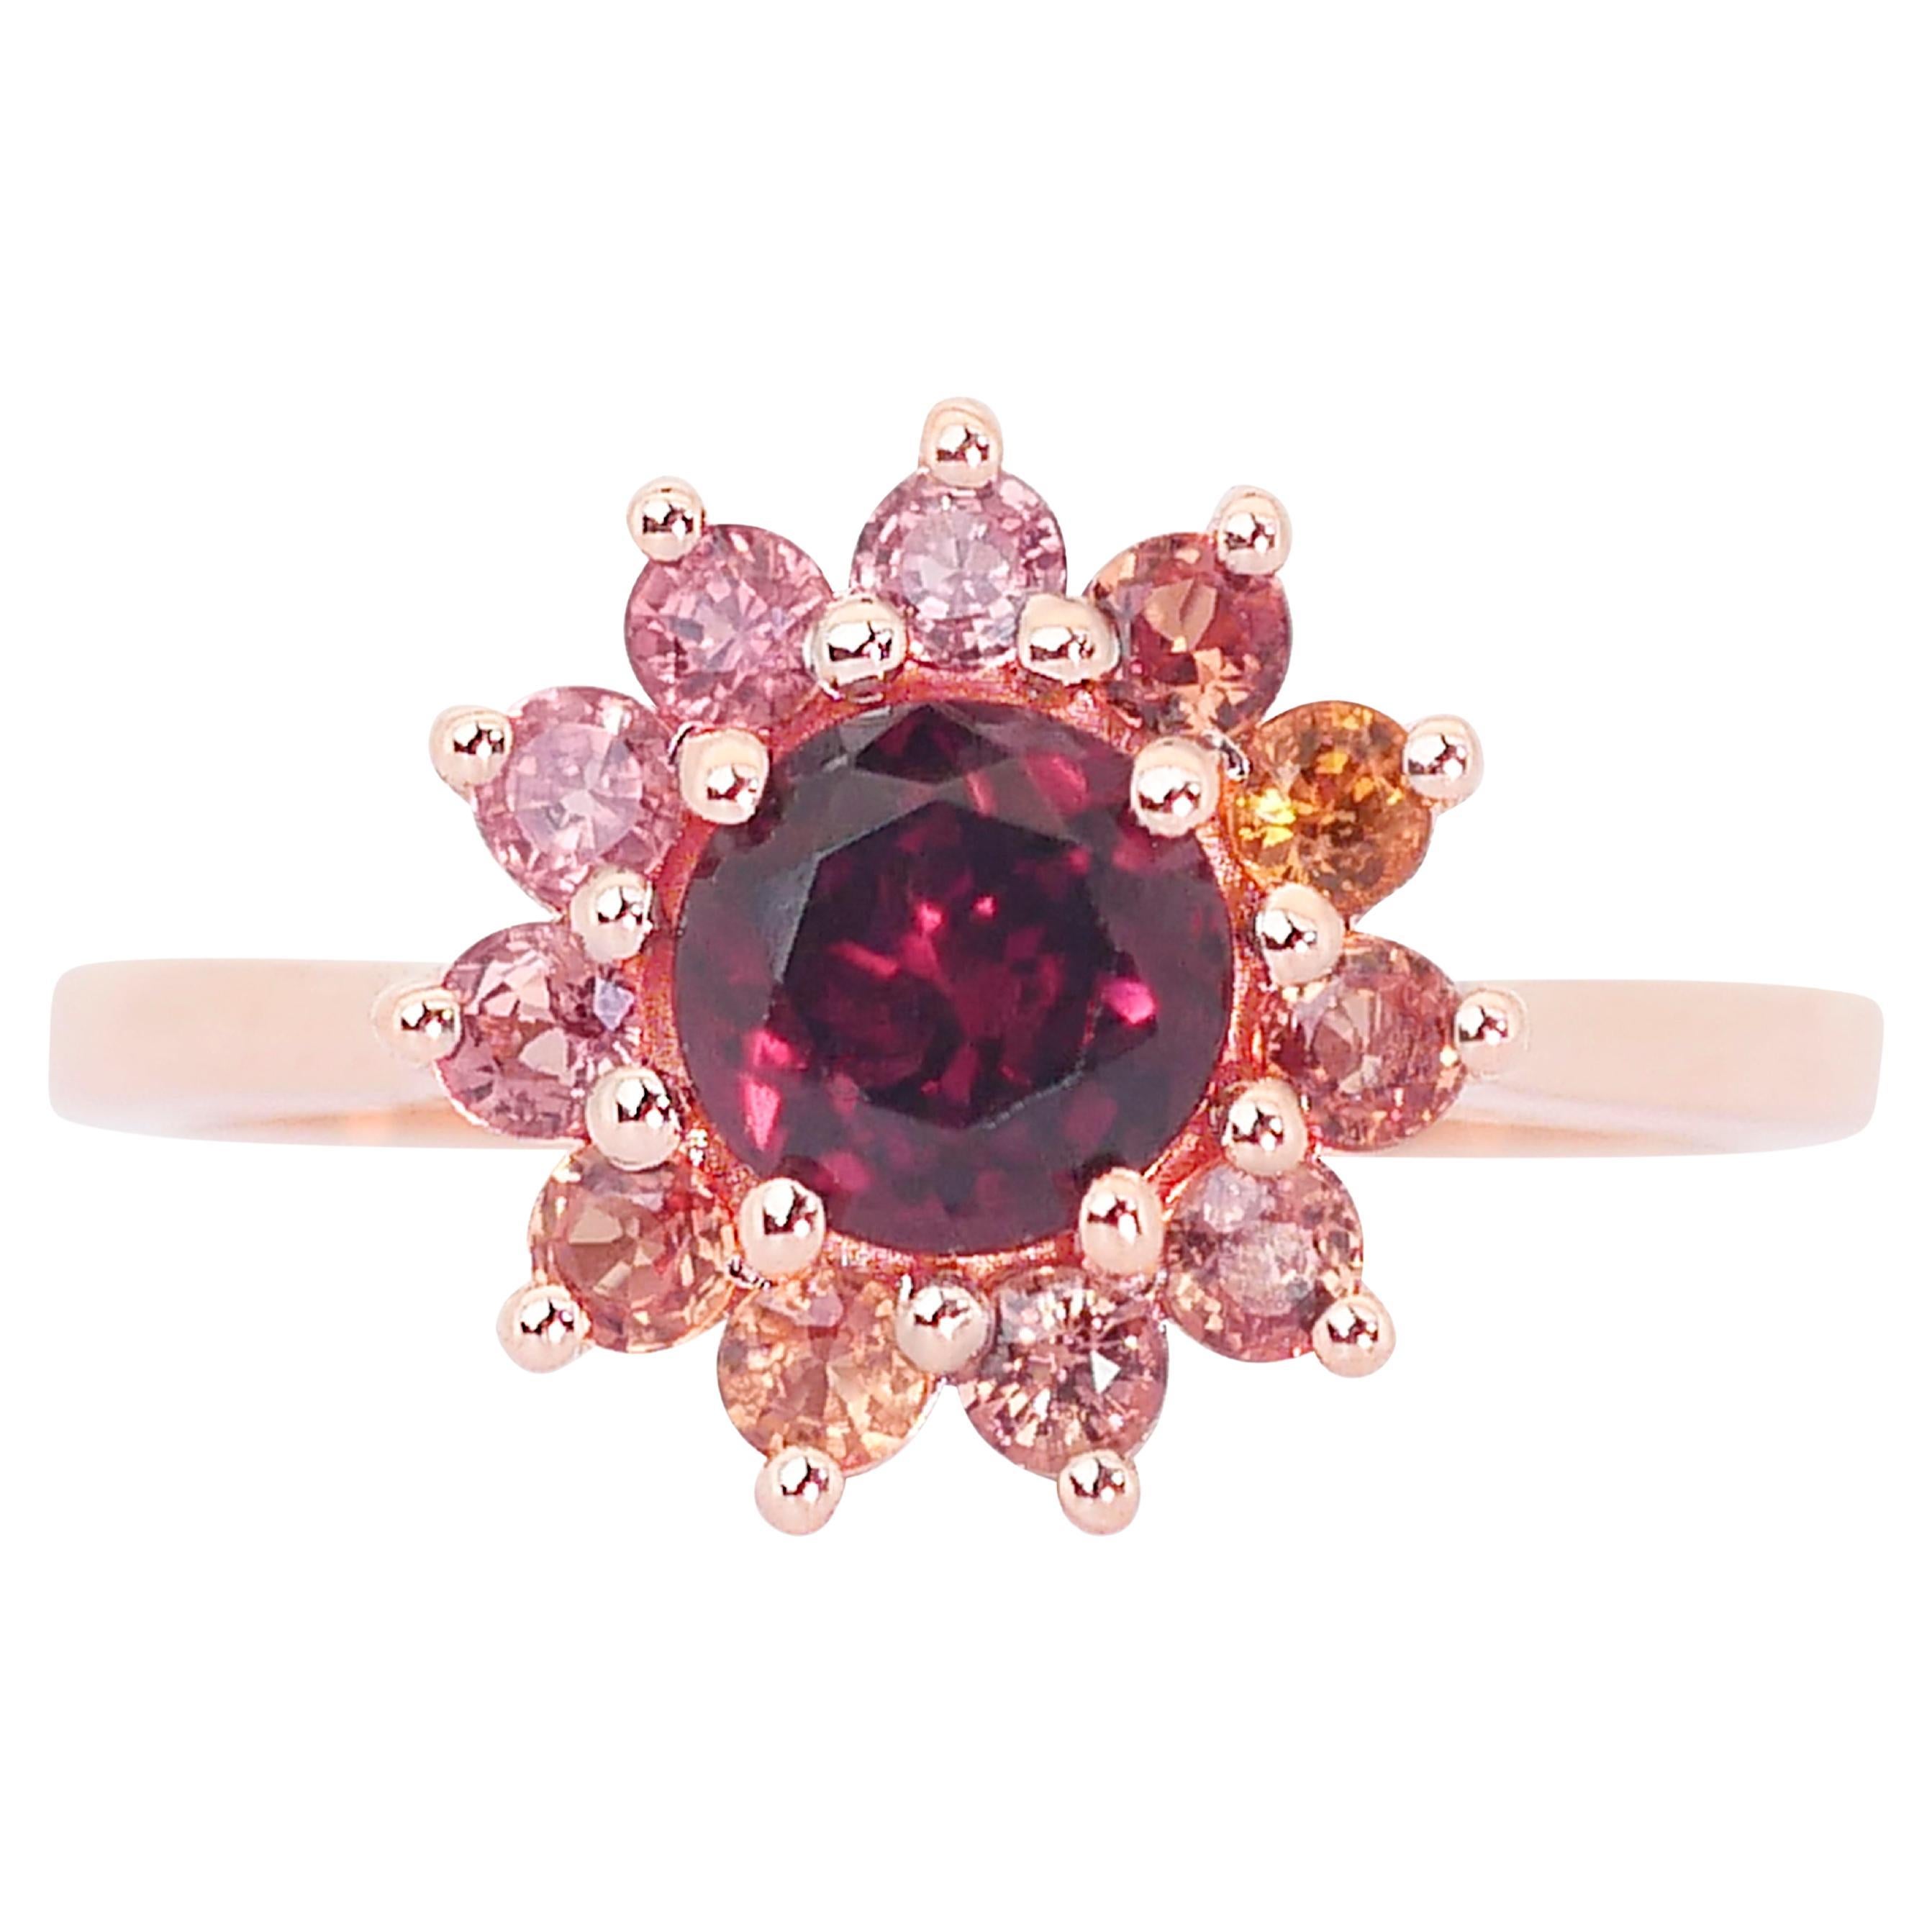 Lustrous 18KW Rose Gold Cluster Garnet Ring with 1.20 ct -  IGI Certified For Sale